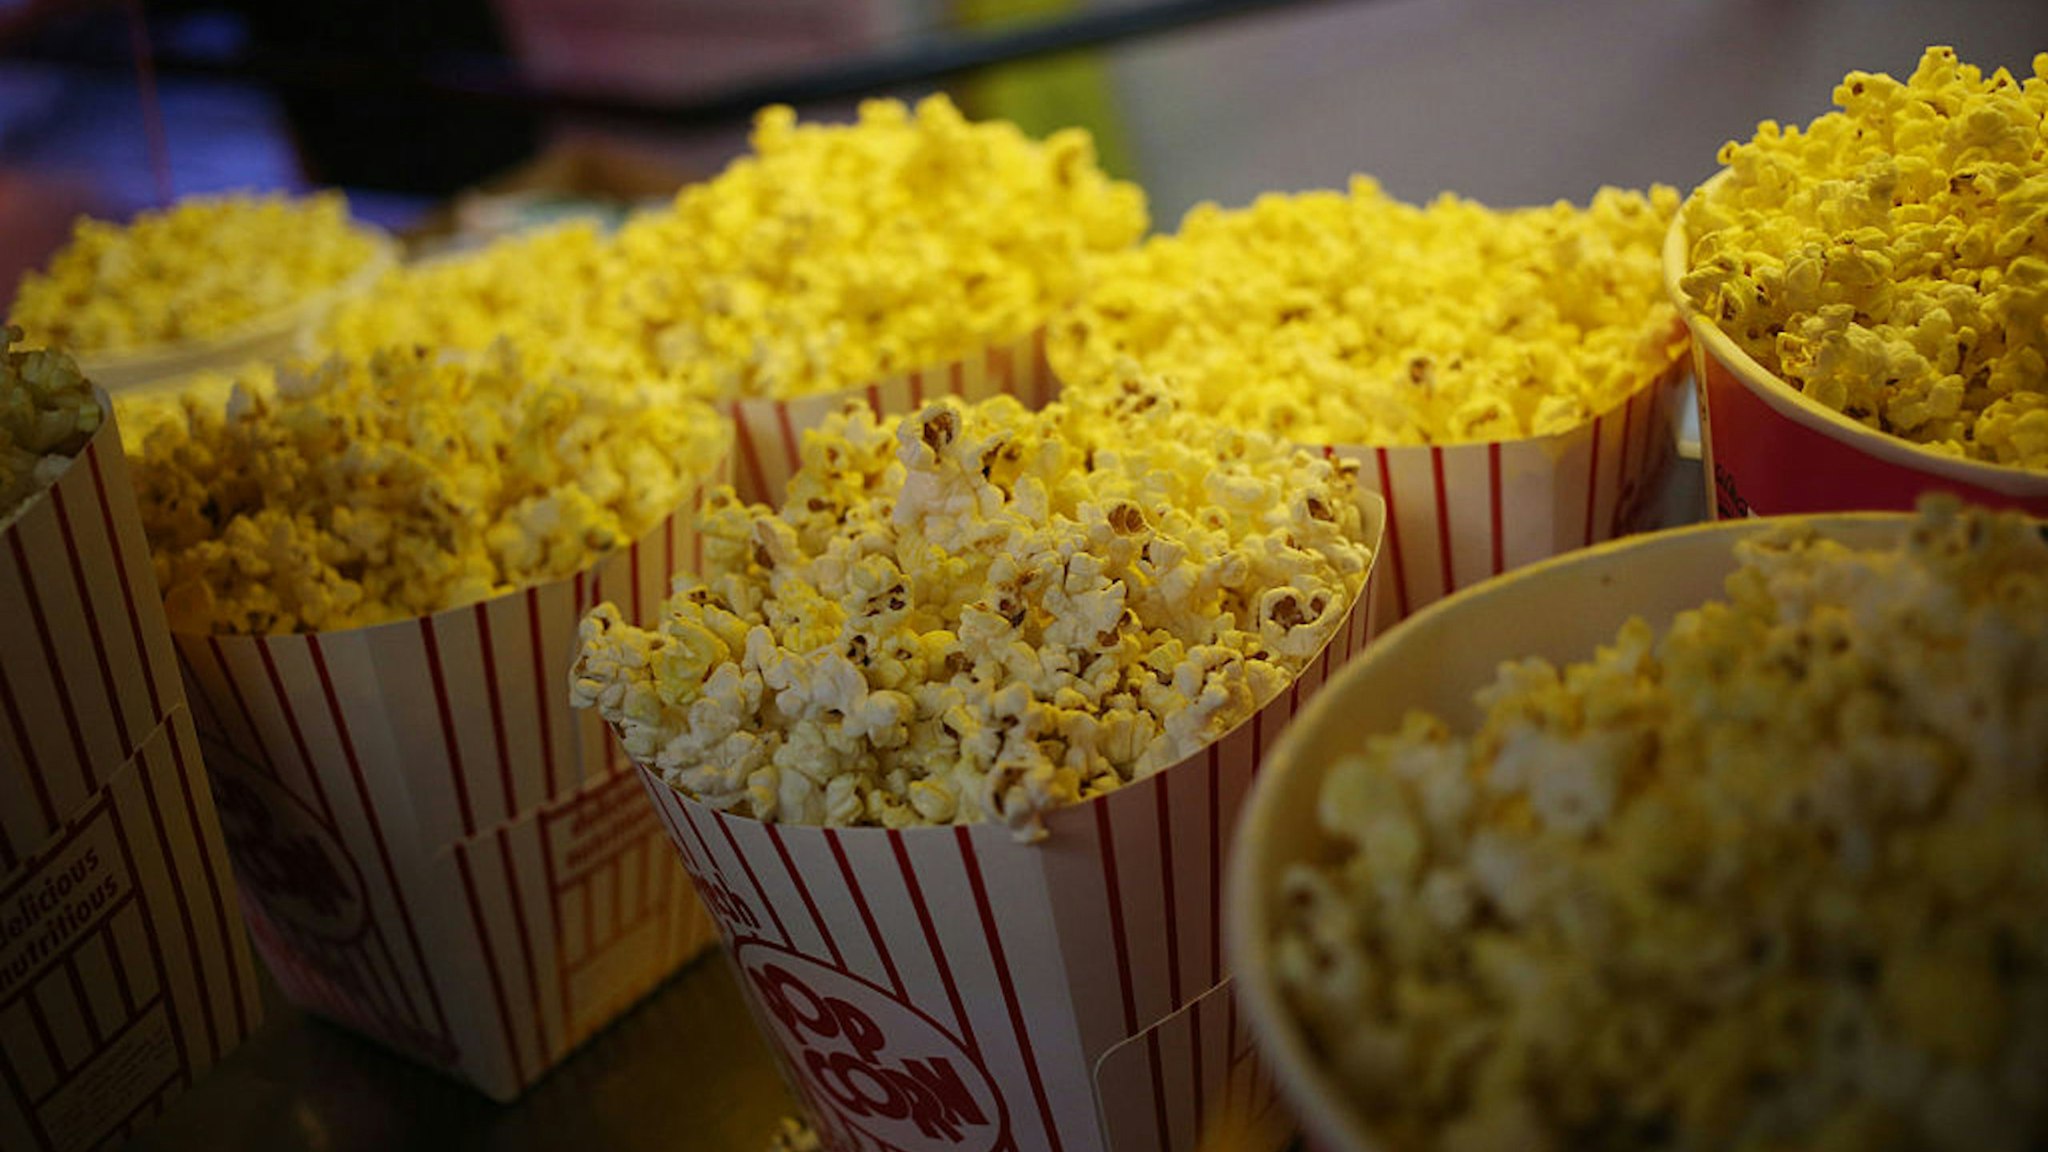 Freshly popped popcorn is displayed for sale inside the snack bar at the Georgetown Drive-In movie theater in Georgetown, Indiana, U.S., on Friday, July 17, 2015. The Georgetown Drive-In opened in 1951 and has been family-owned and operated for the past fifty years.